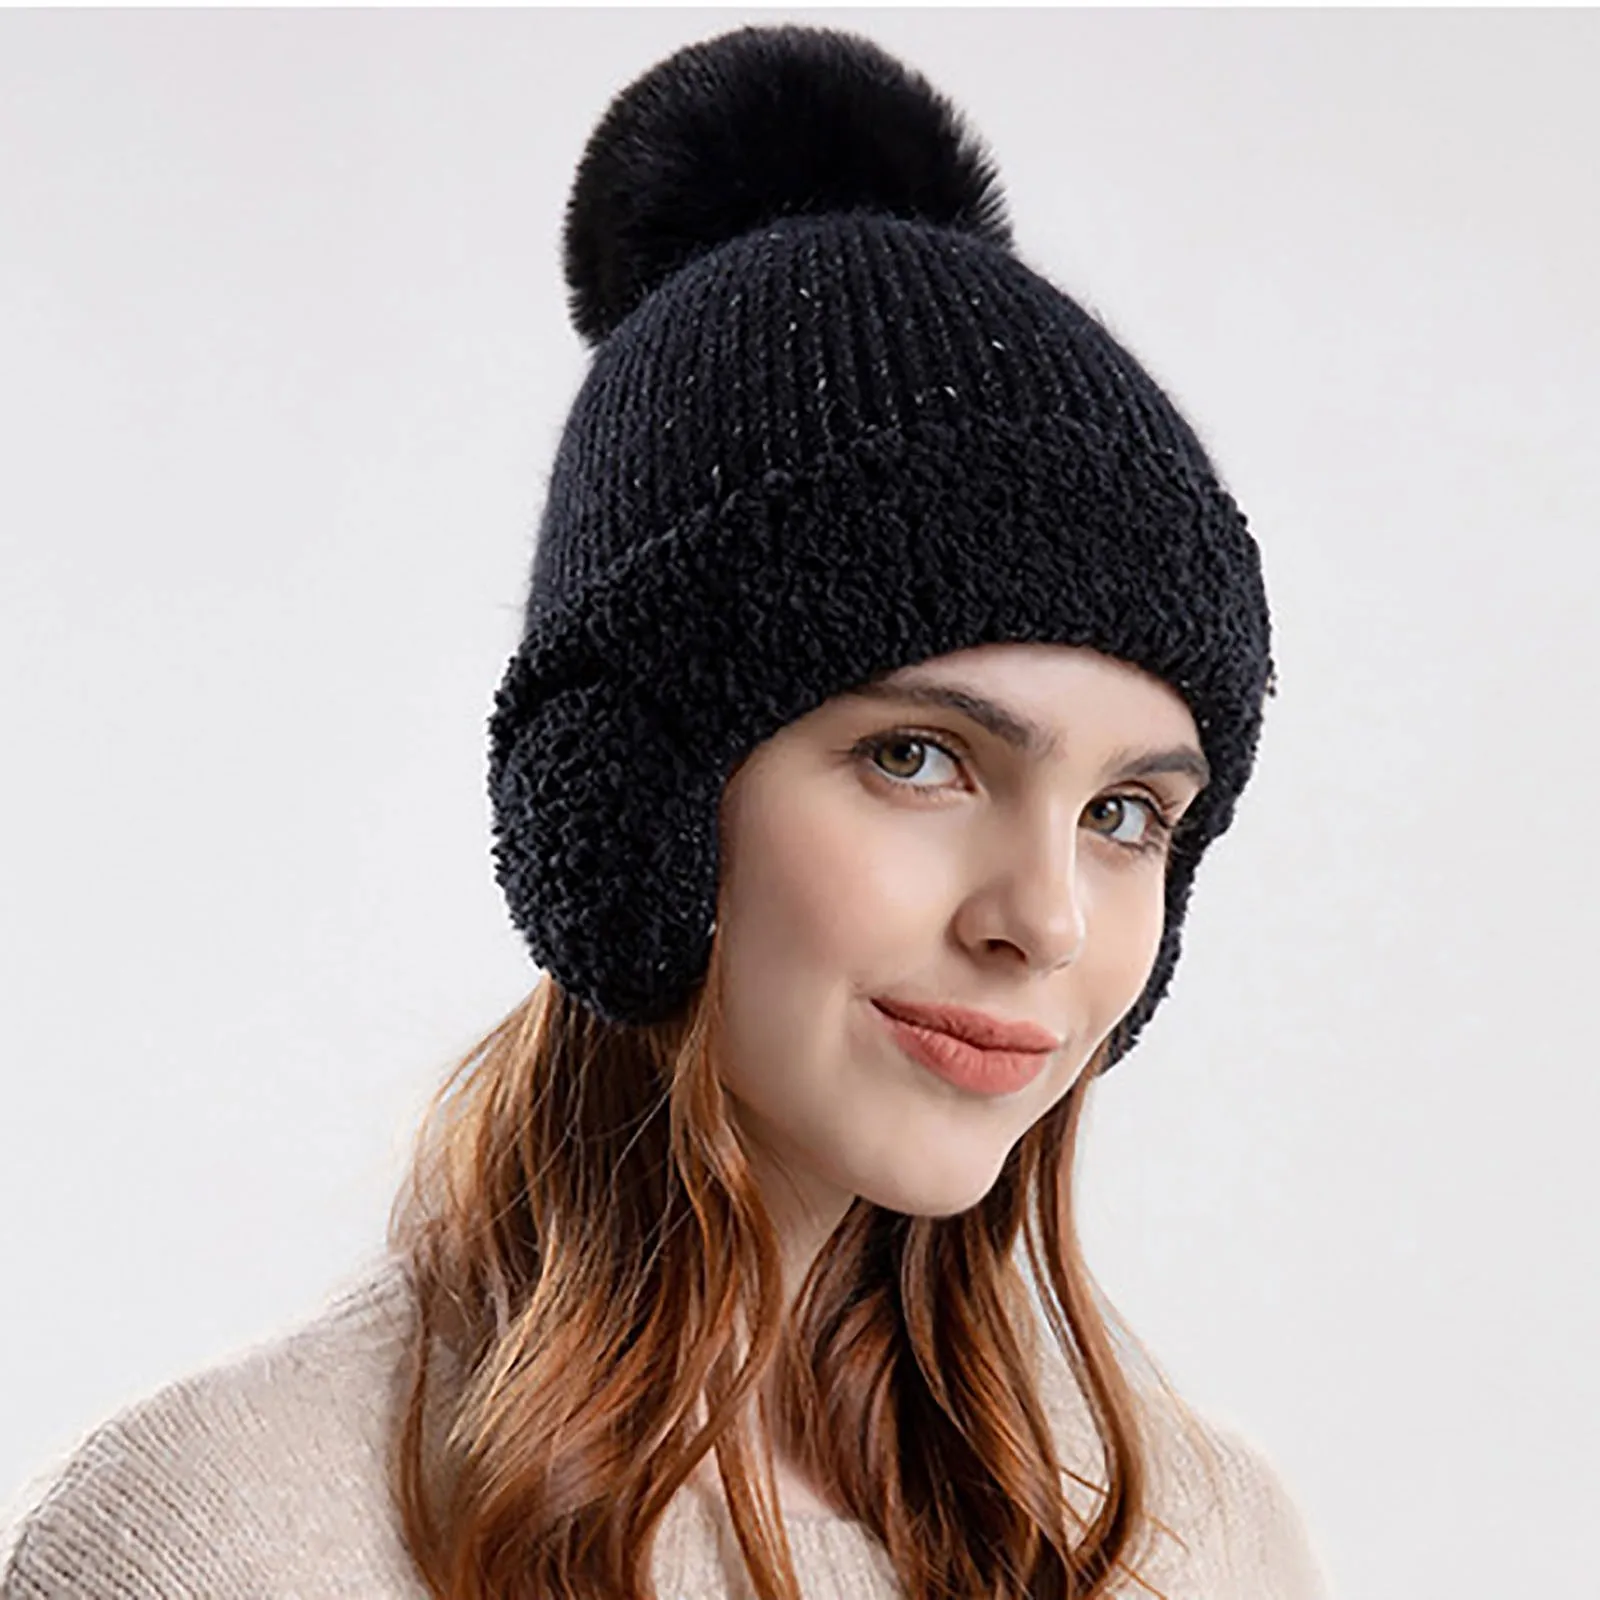 

Women's Knitted Hats Can Hang Outdoor Warm Woolen Hats Women's Winter Hats 2022 Hat New Fashion Wool Knitted Beanie hat new